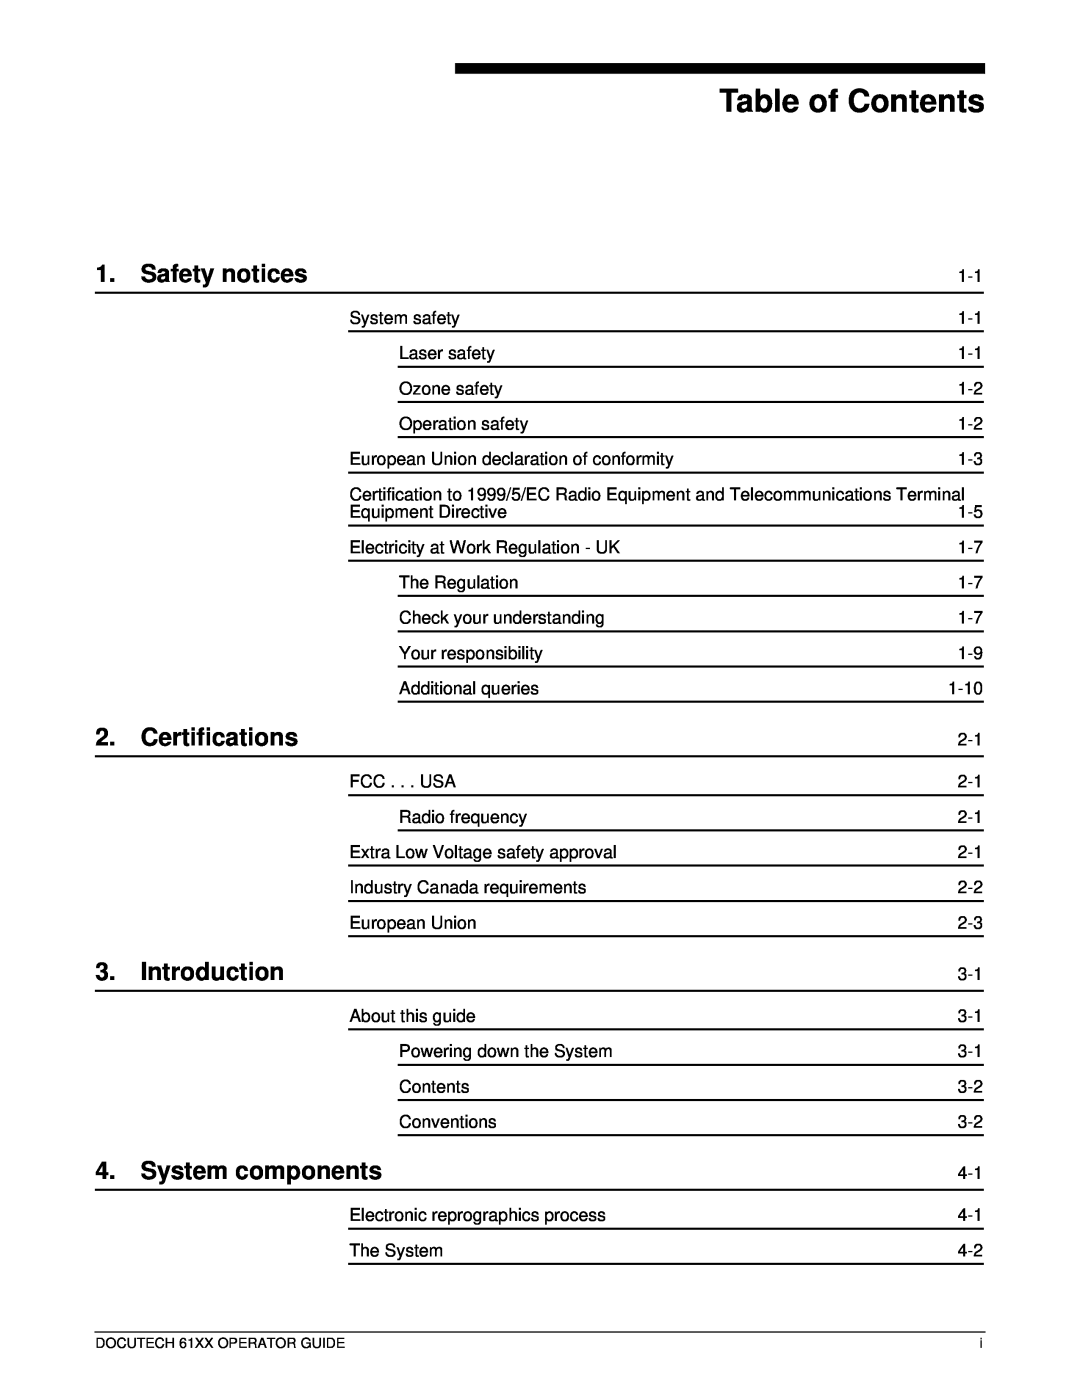 Xerox 61xx manual Table of Contents, Safety notices, Certifications, Introduction, System components 